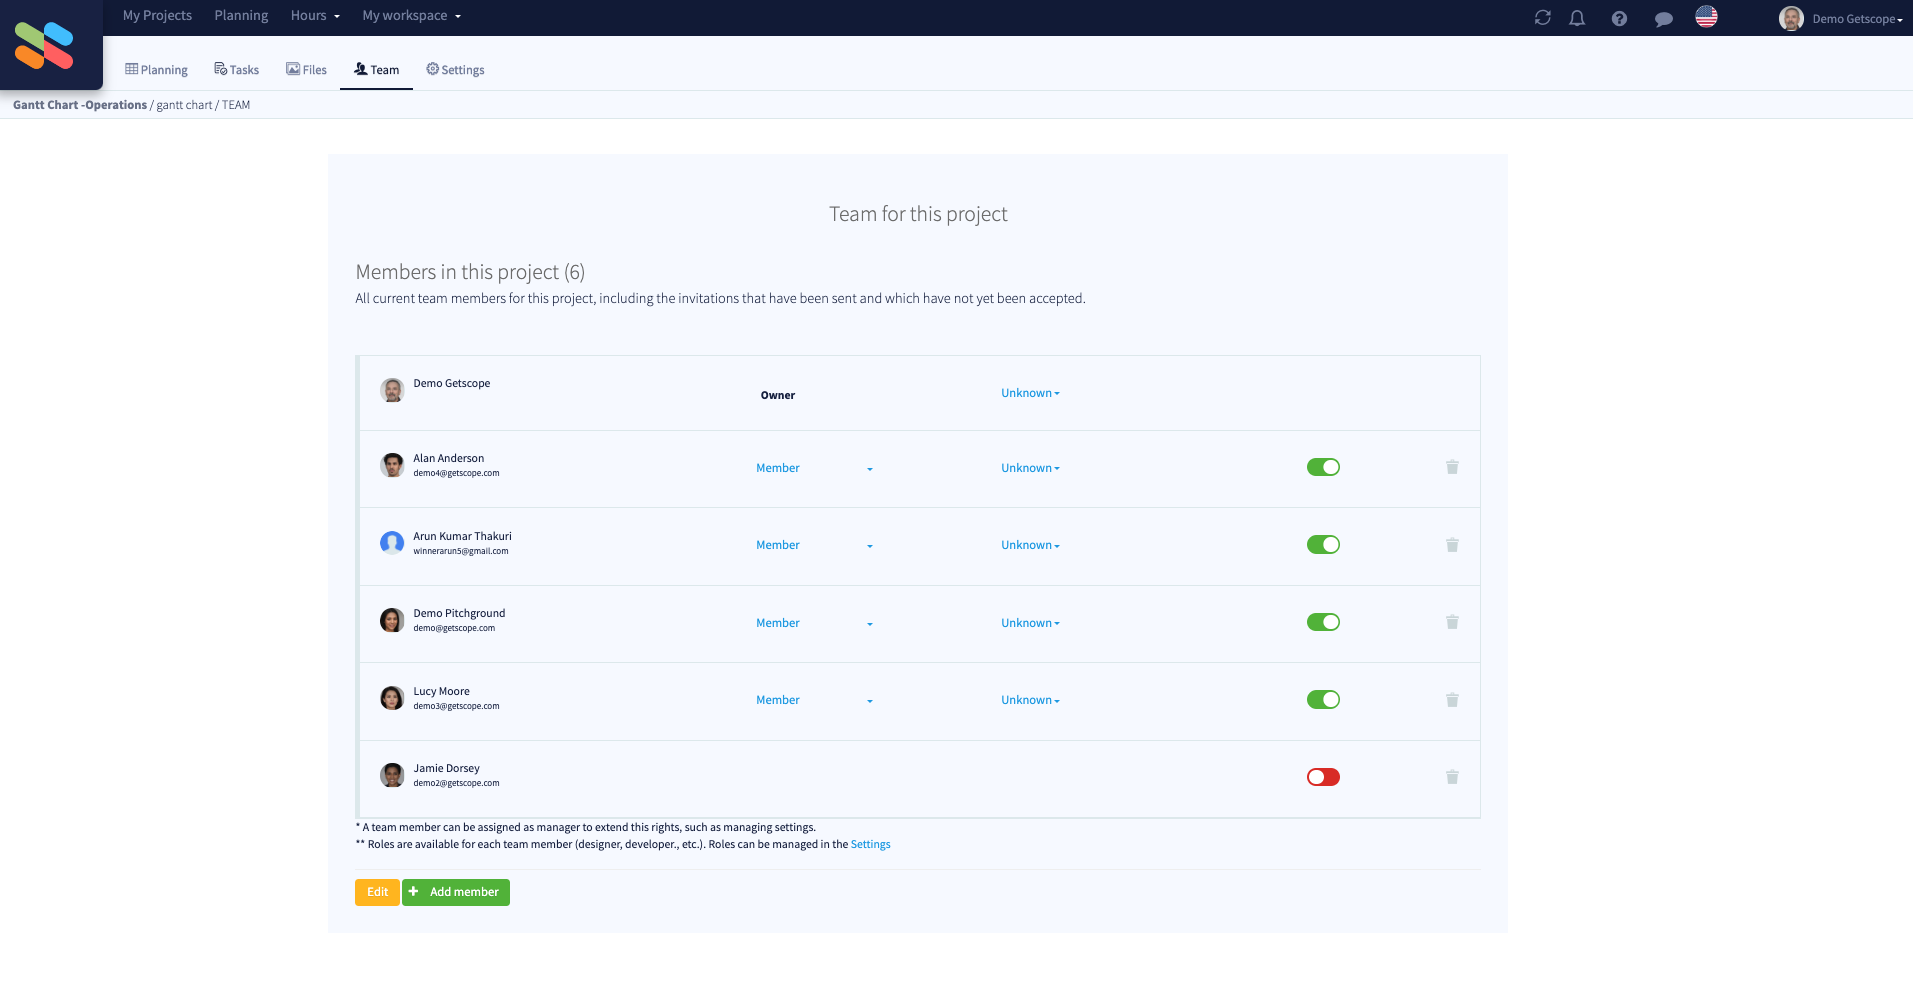 Effortlessly manage and organize your team members for every project. With just a few clicks, you can add or remove team members from a particular project, and assign them to different roles and permissions.